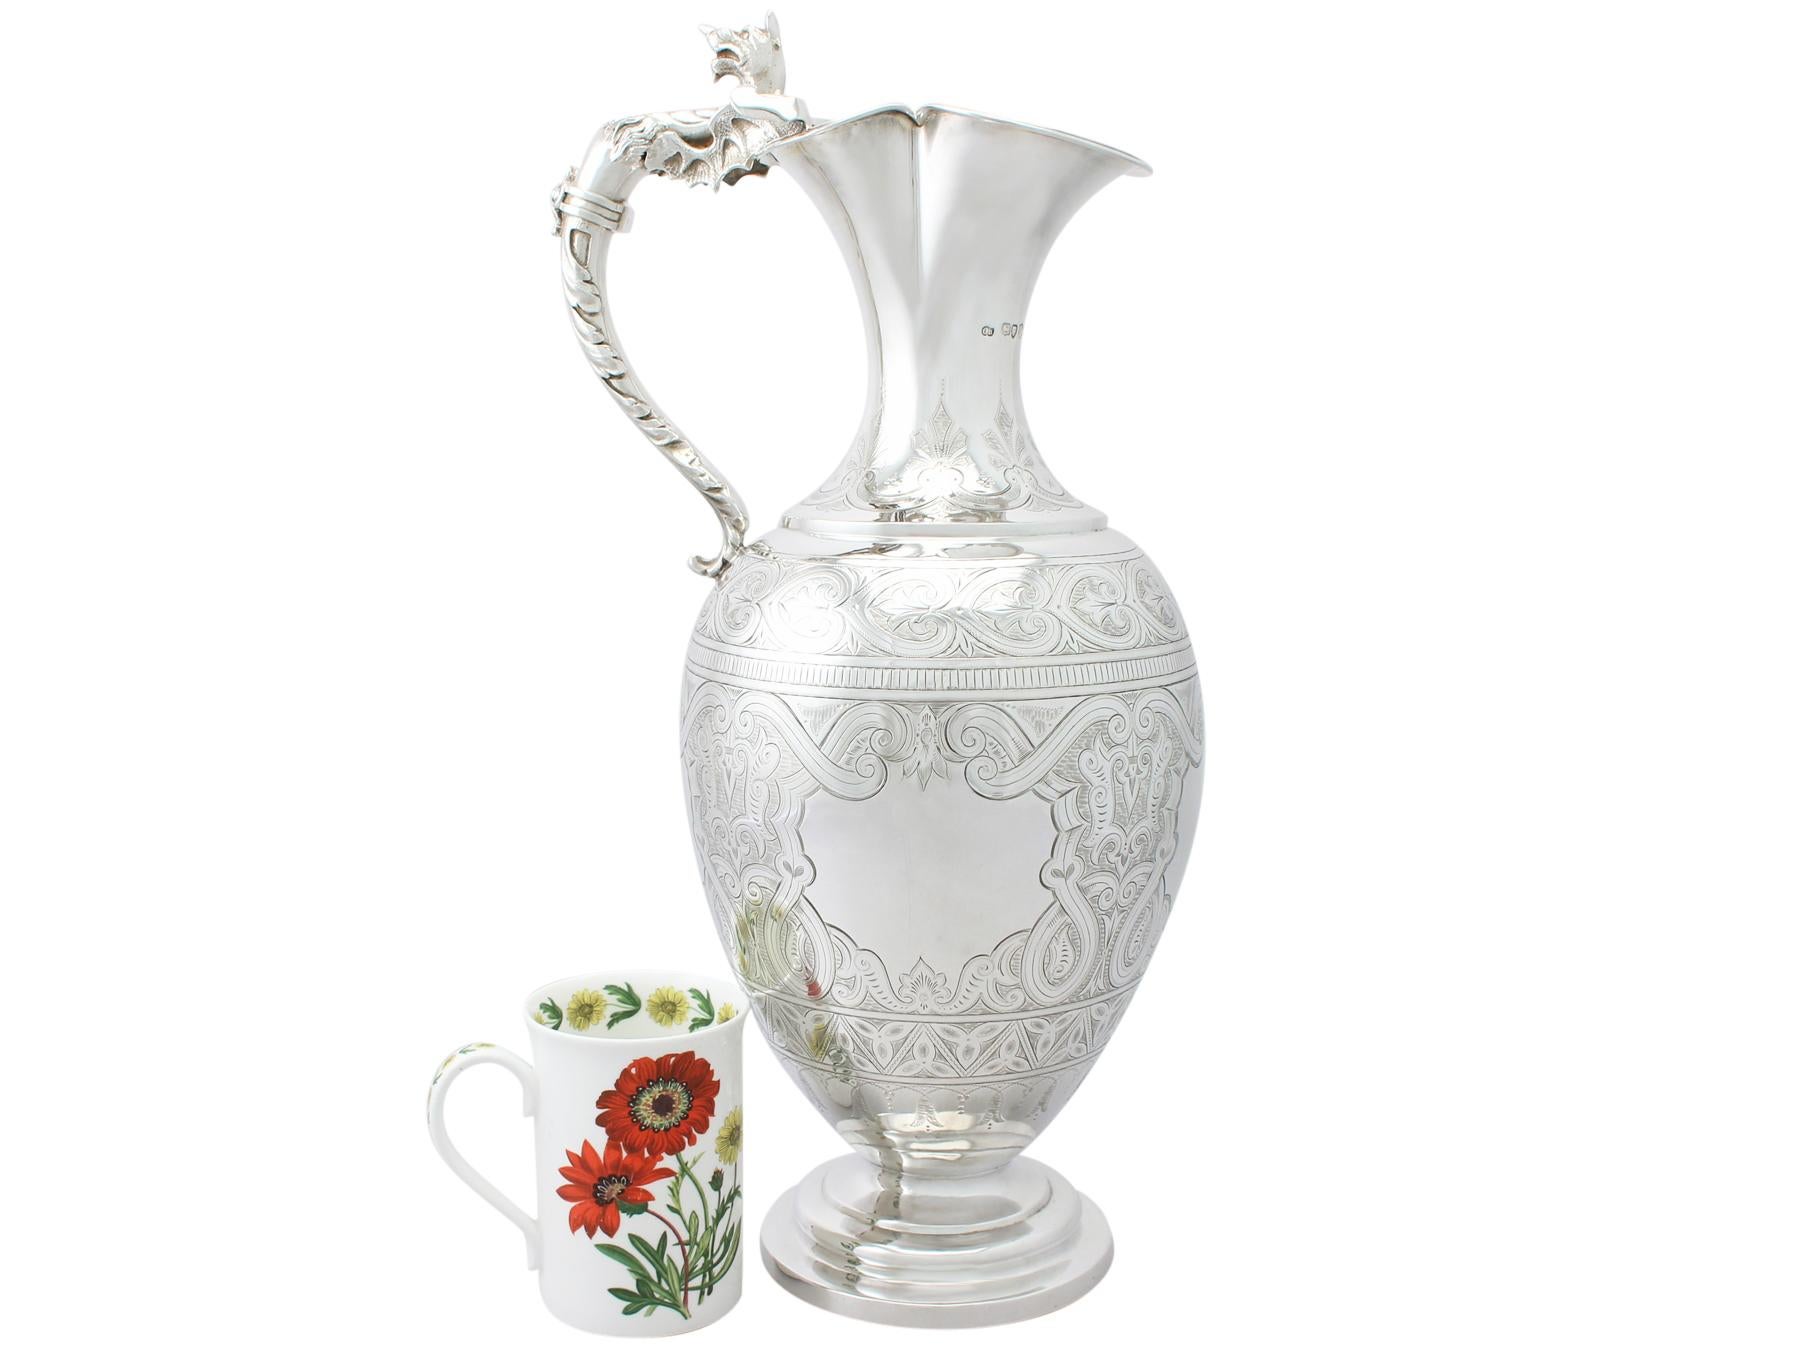 A magnificent, fine and impressive, large antique Victorian English sterling silver wine ewer; part of our wine and drinks related silverware collection.

This magnificent antique Victorian English sterling silver wine ewer has an ovoid shaped